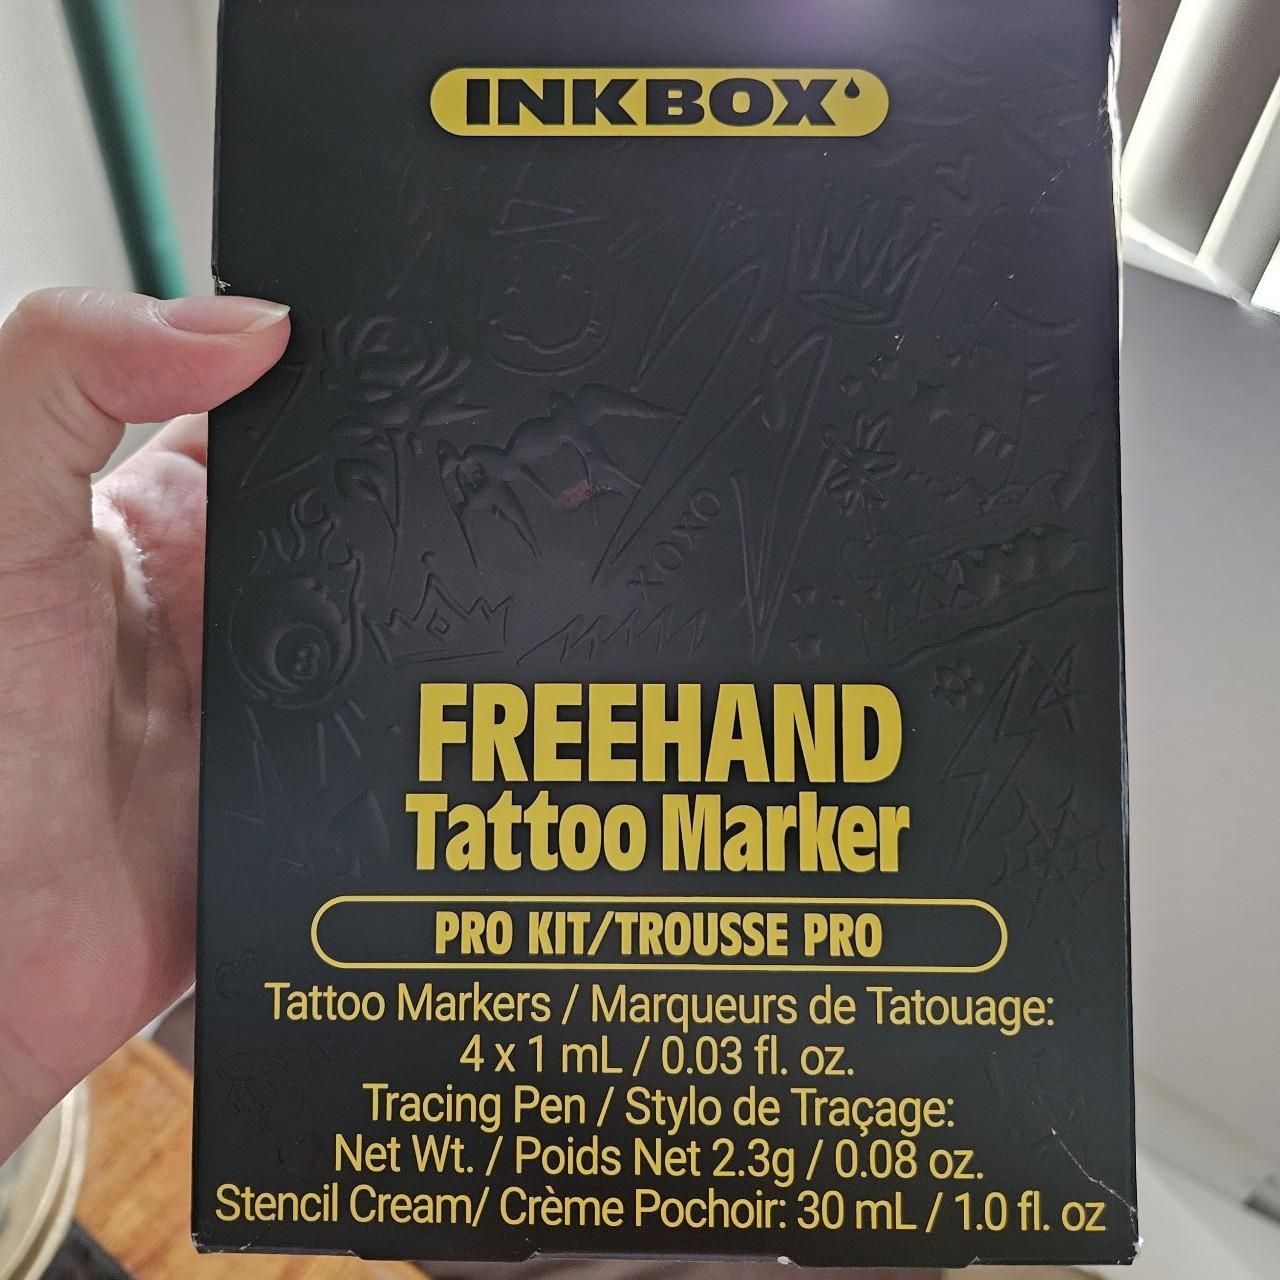 How to Apply Your Inkbox Tattoo: Small Finger Tat Example - YouTube